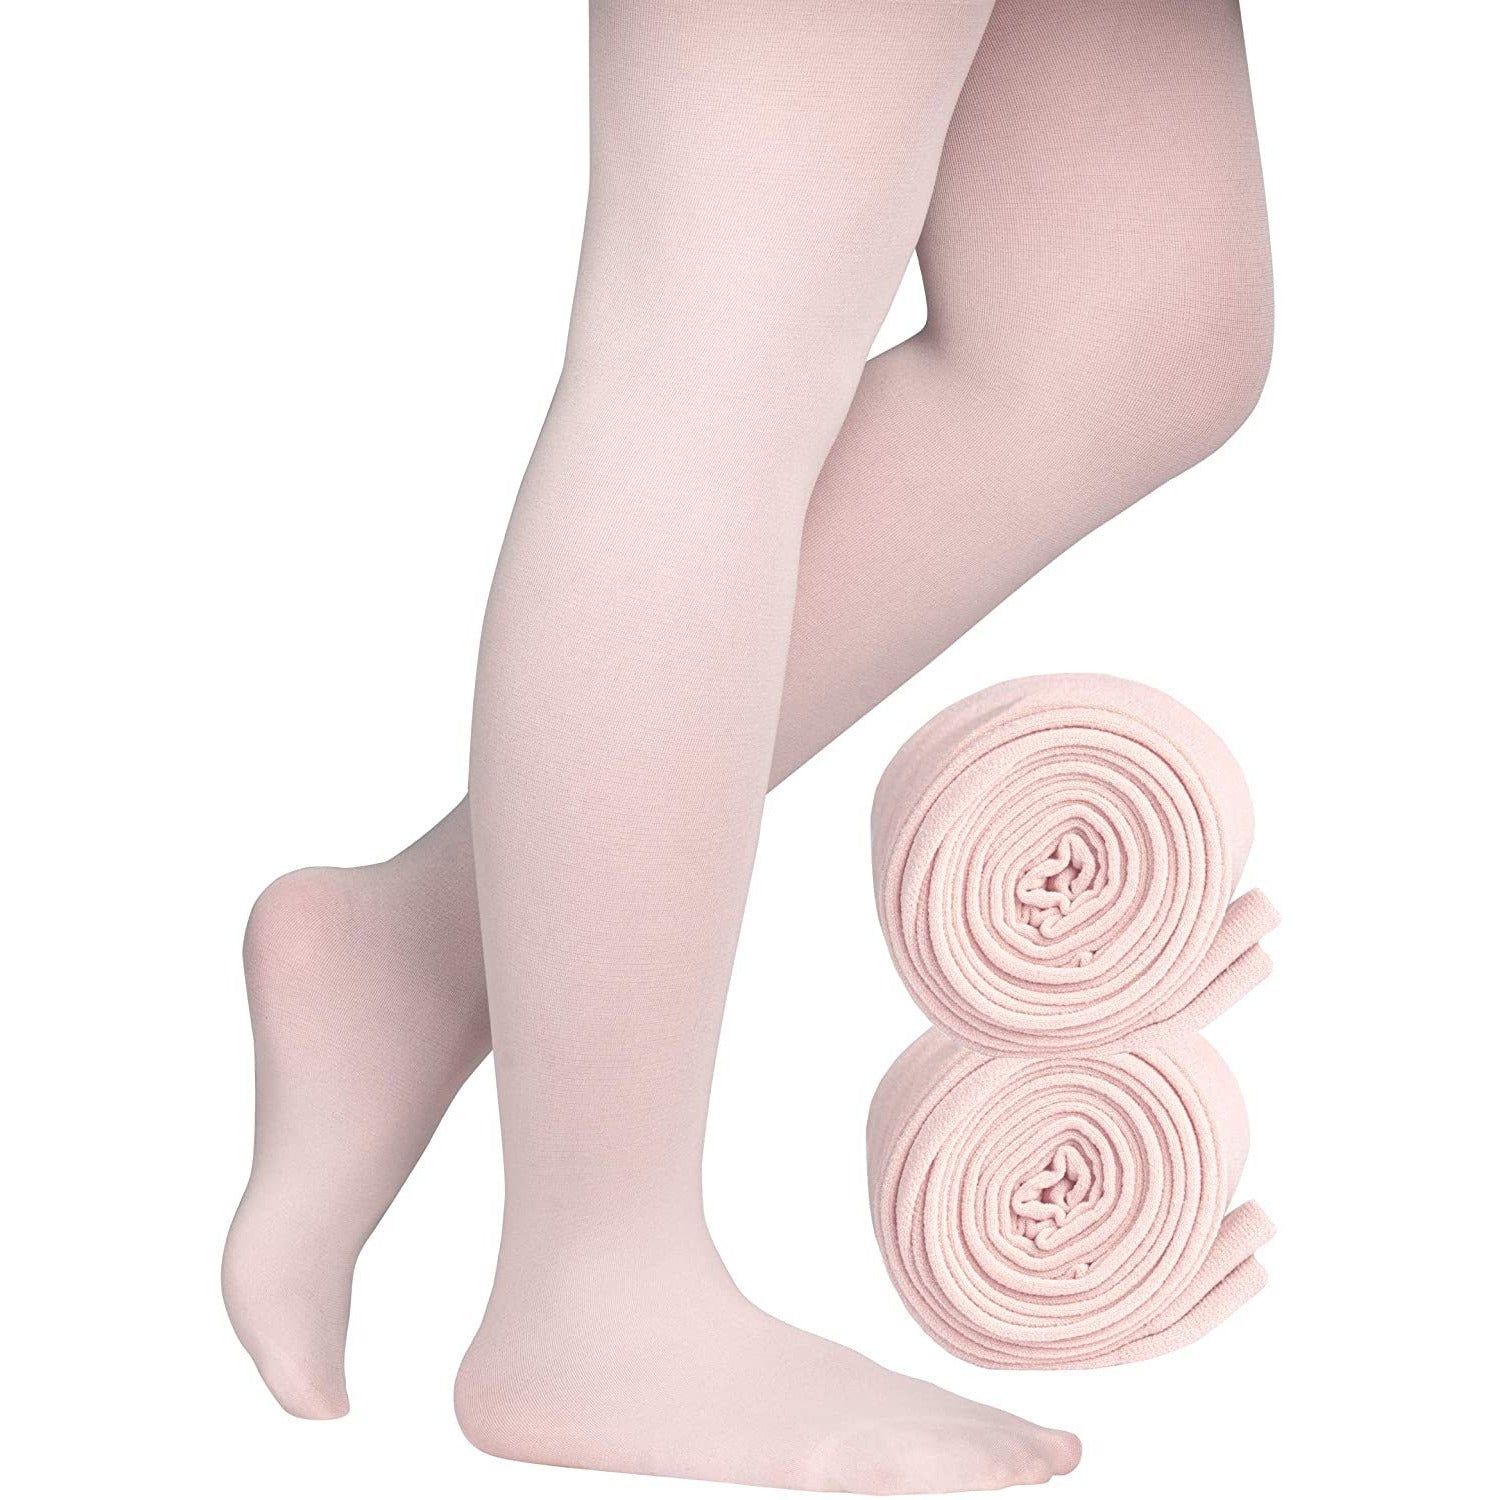  Stretchy Pink Ballet Tights For Girls 6-8 Ultra